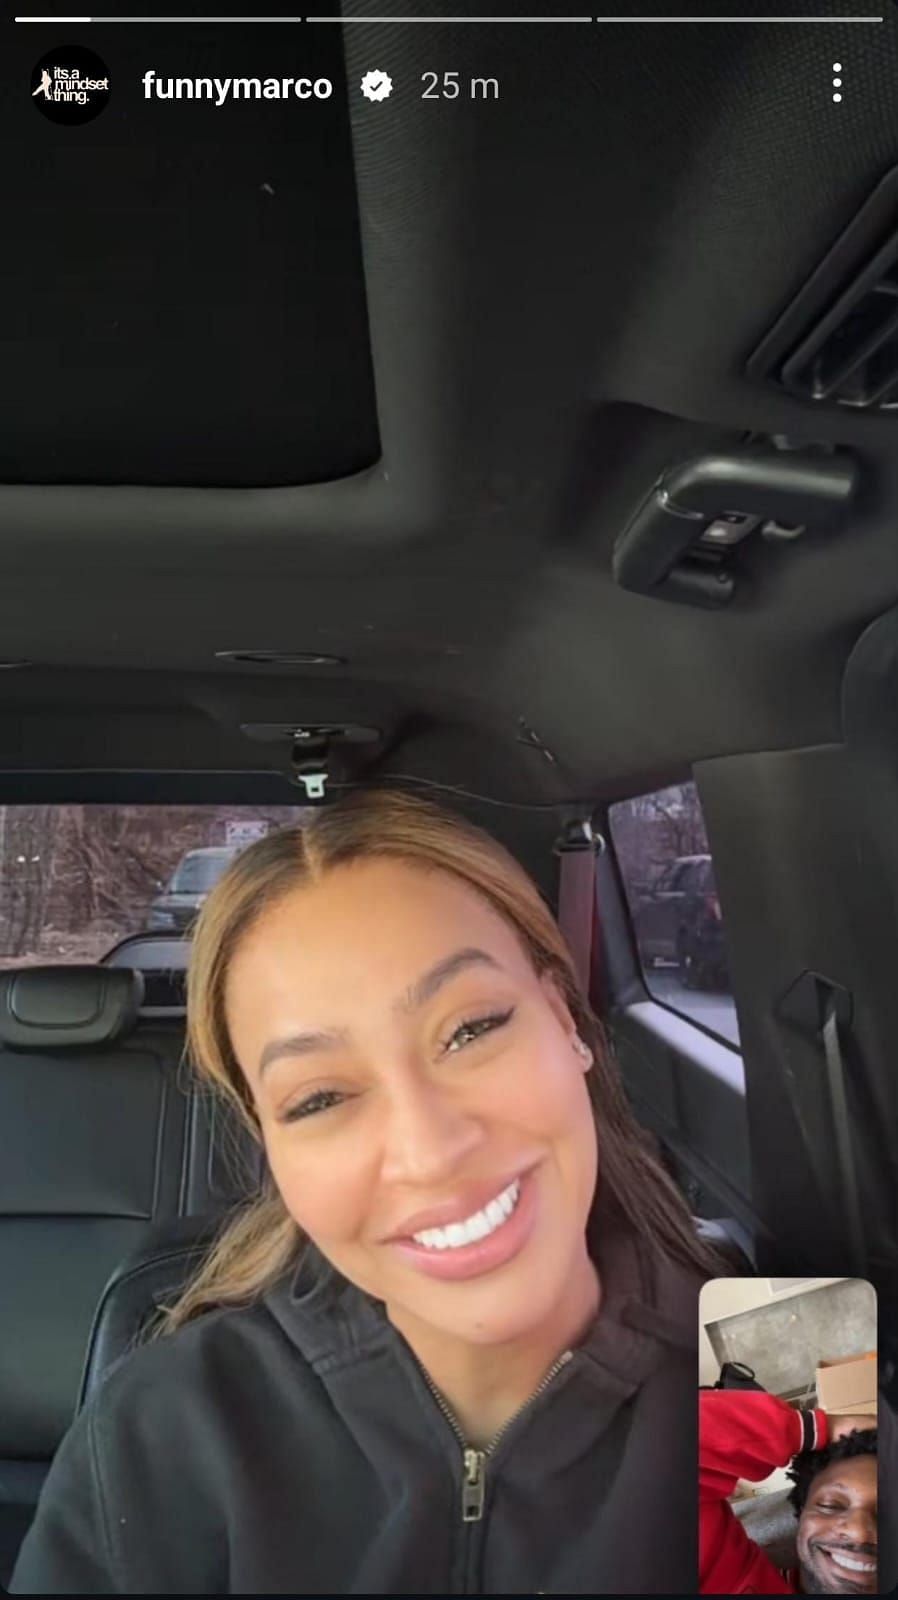 Funny Marco enjoying a FaceTime call session with La La Anthony